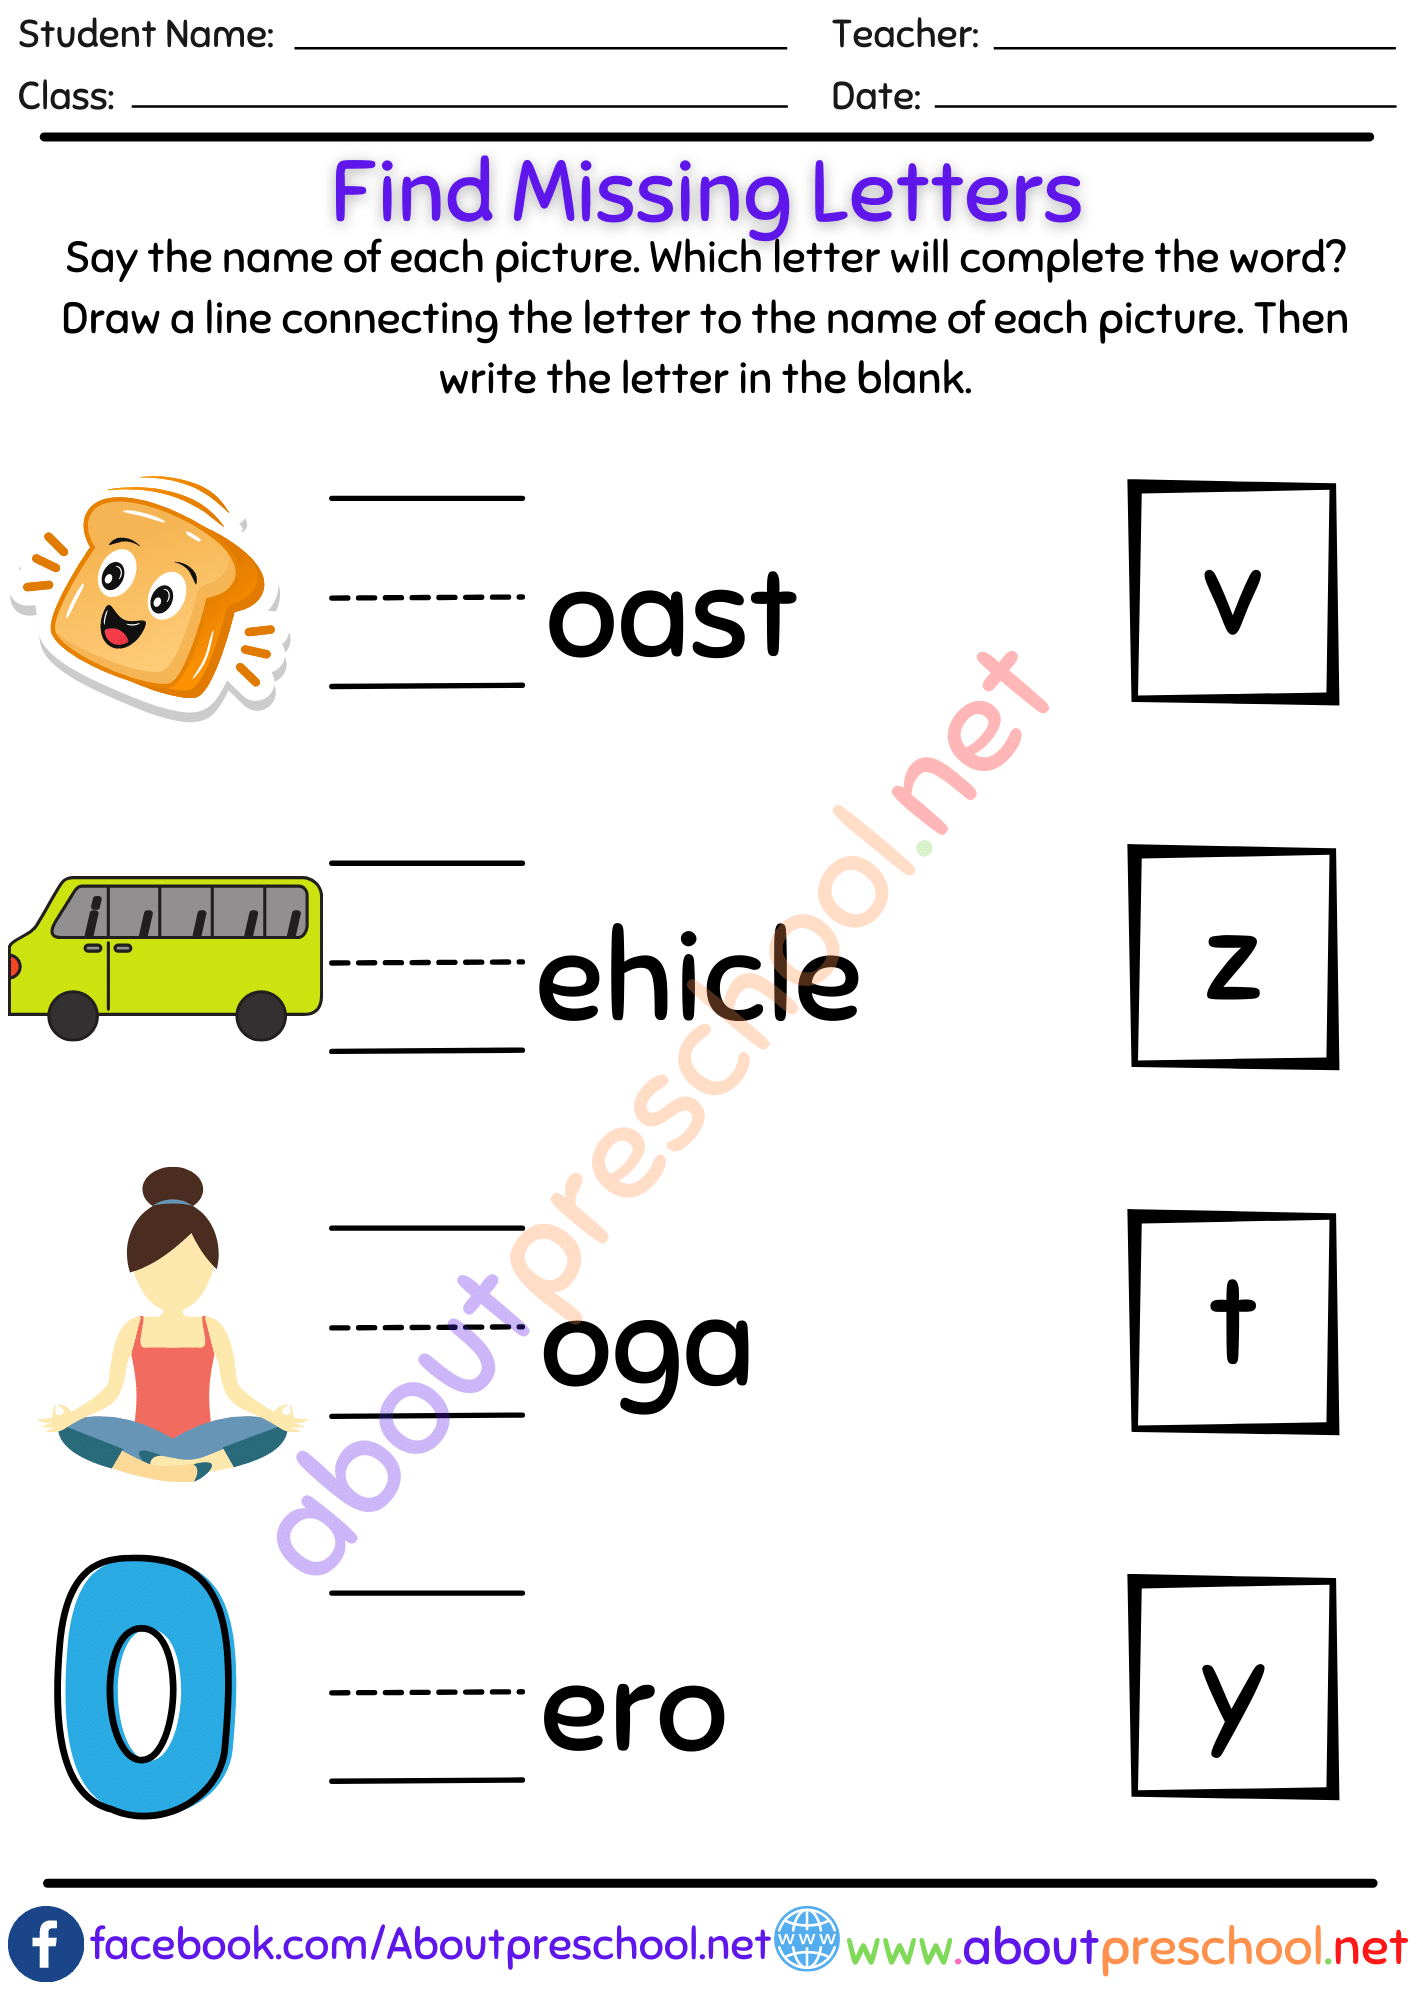 Find Missing Letters-3